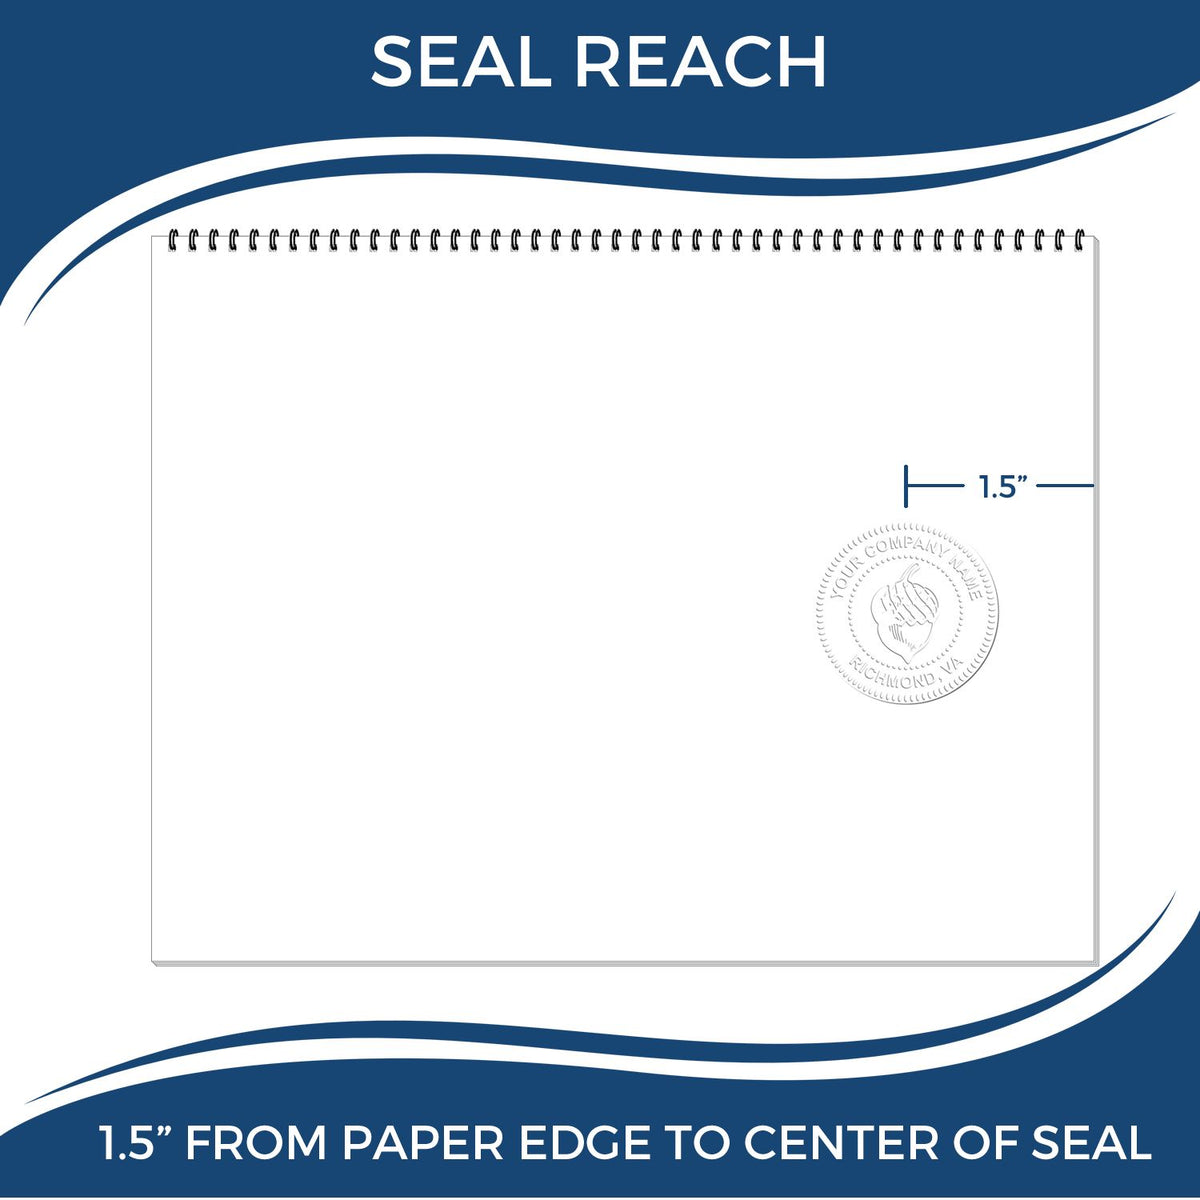 An infographic showing the seal reach which is represented by a ruler and a miniature seal image of the Gift Kentucky Architect Seal